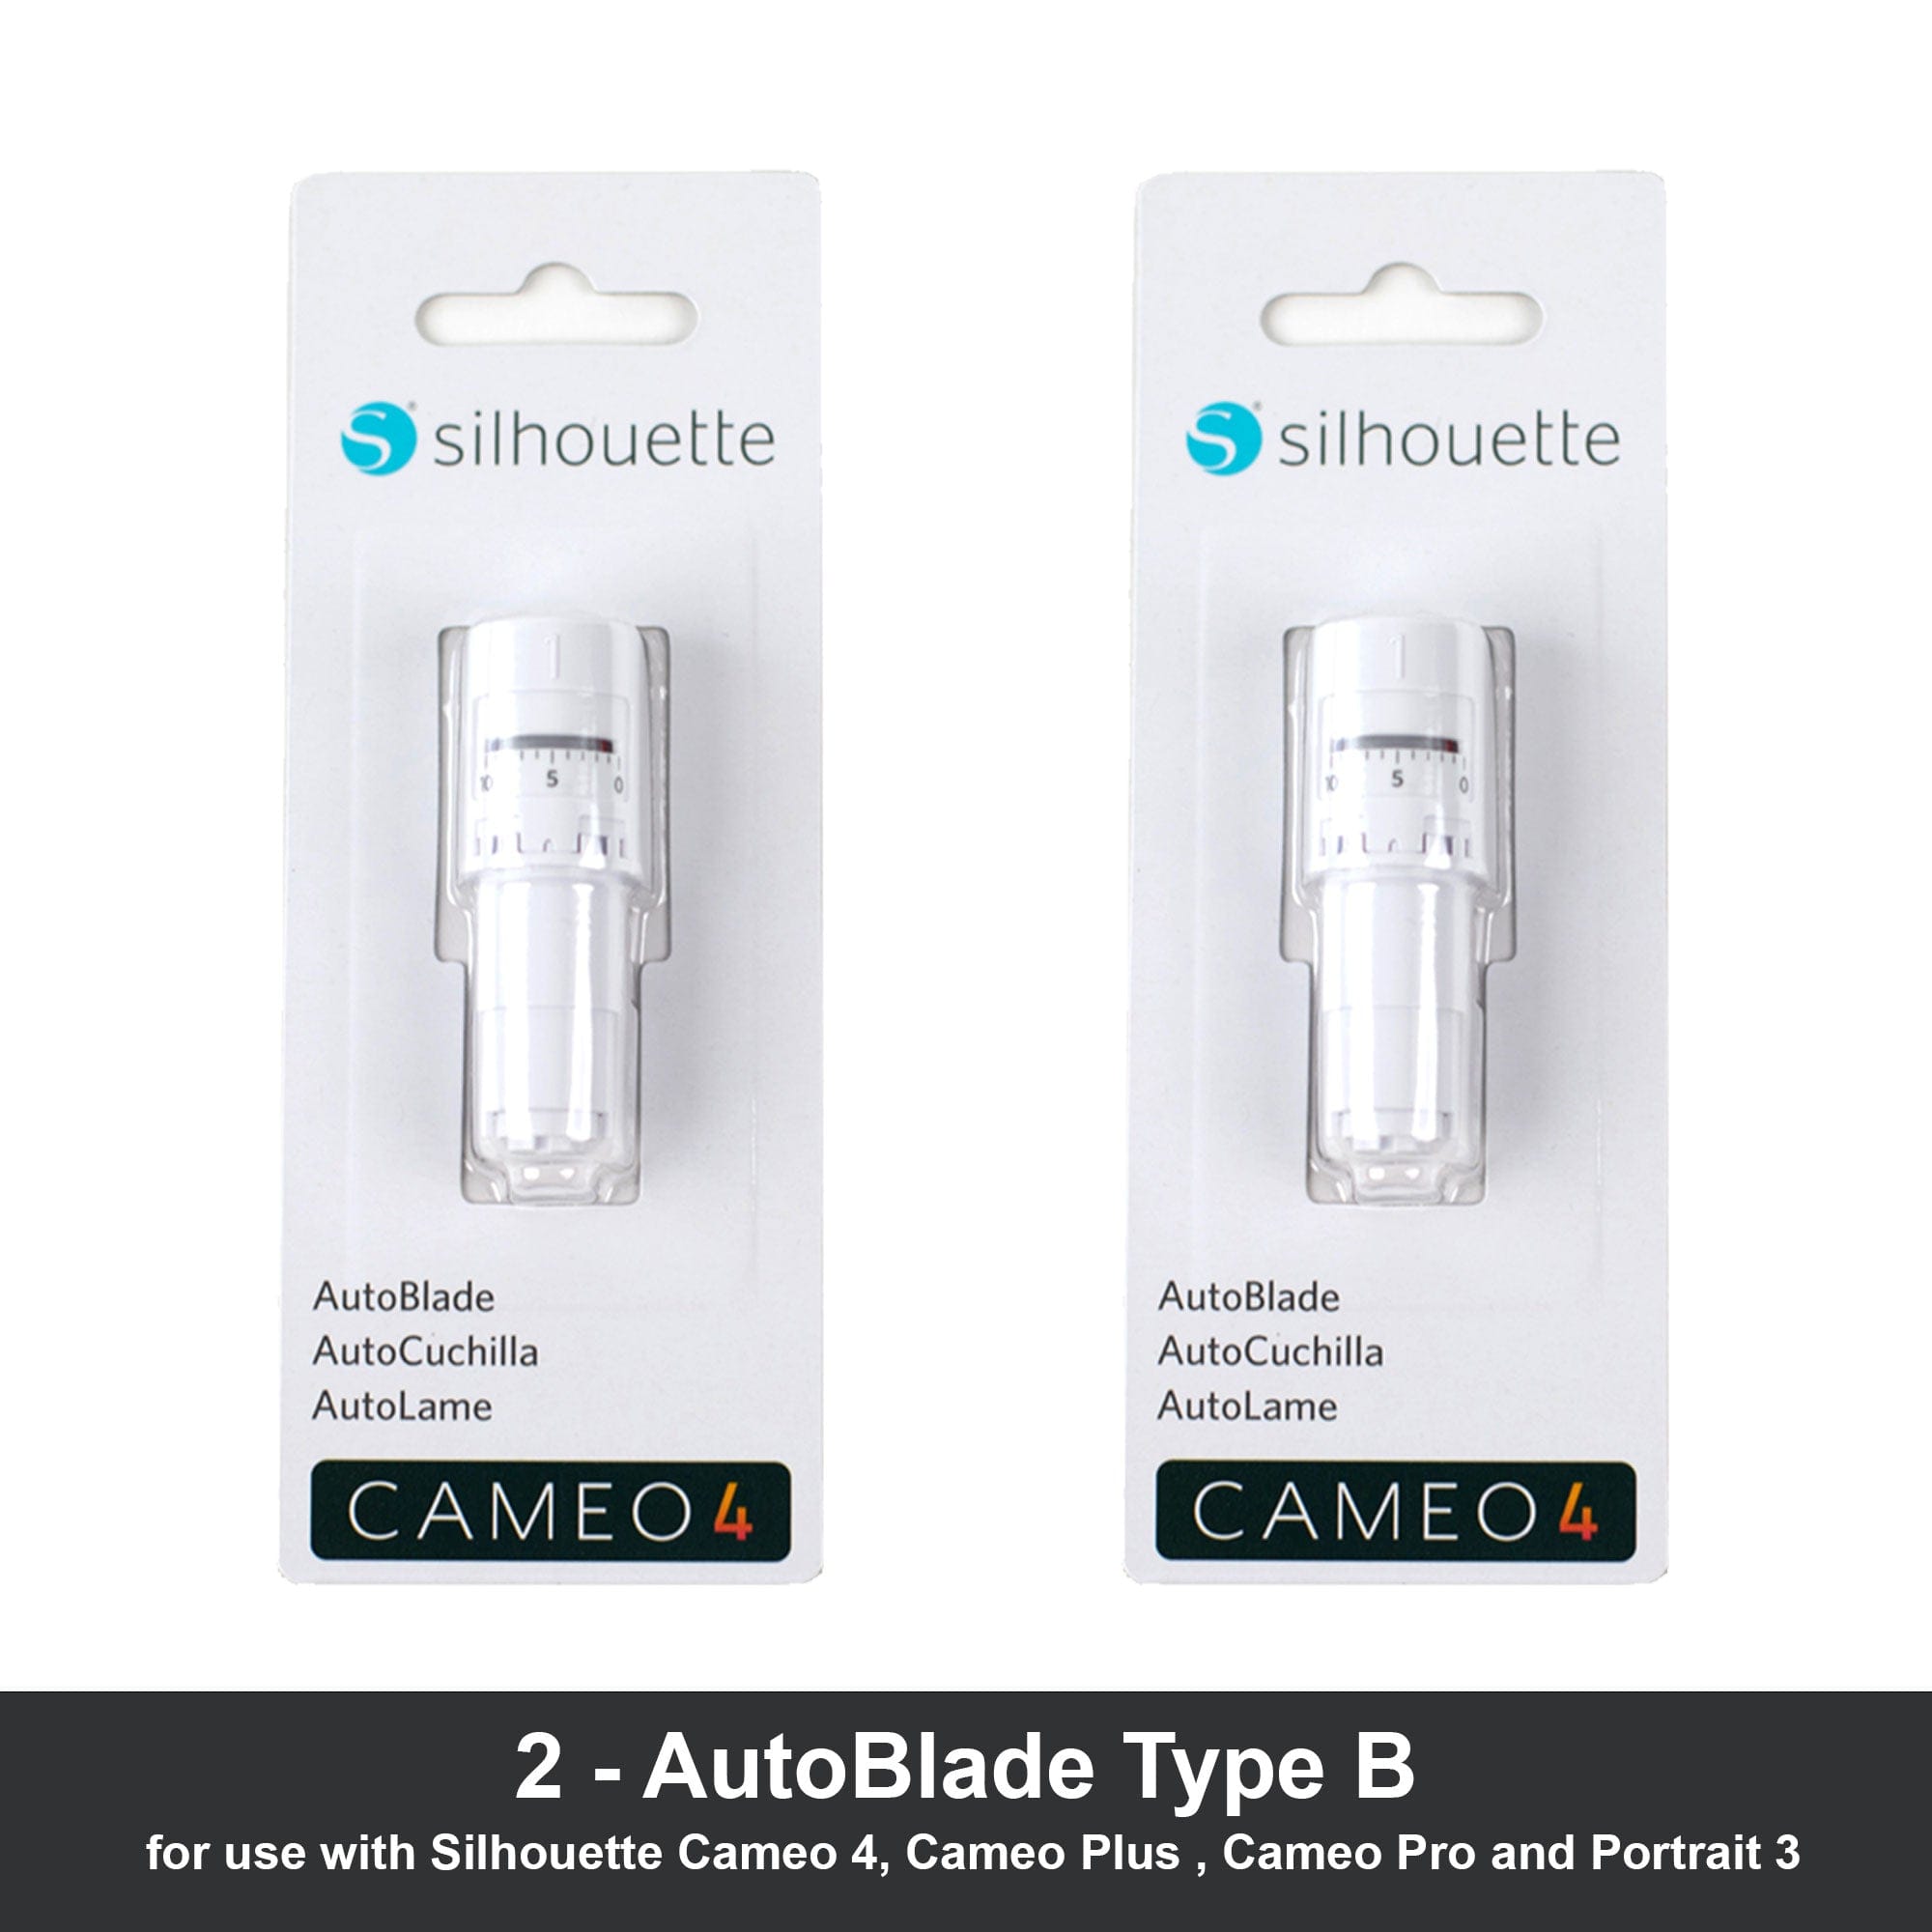 How to Cut Fabric with Silhouette CAMEO 4 AutoBlade - Silhouette